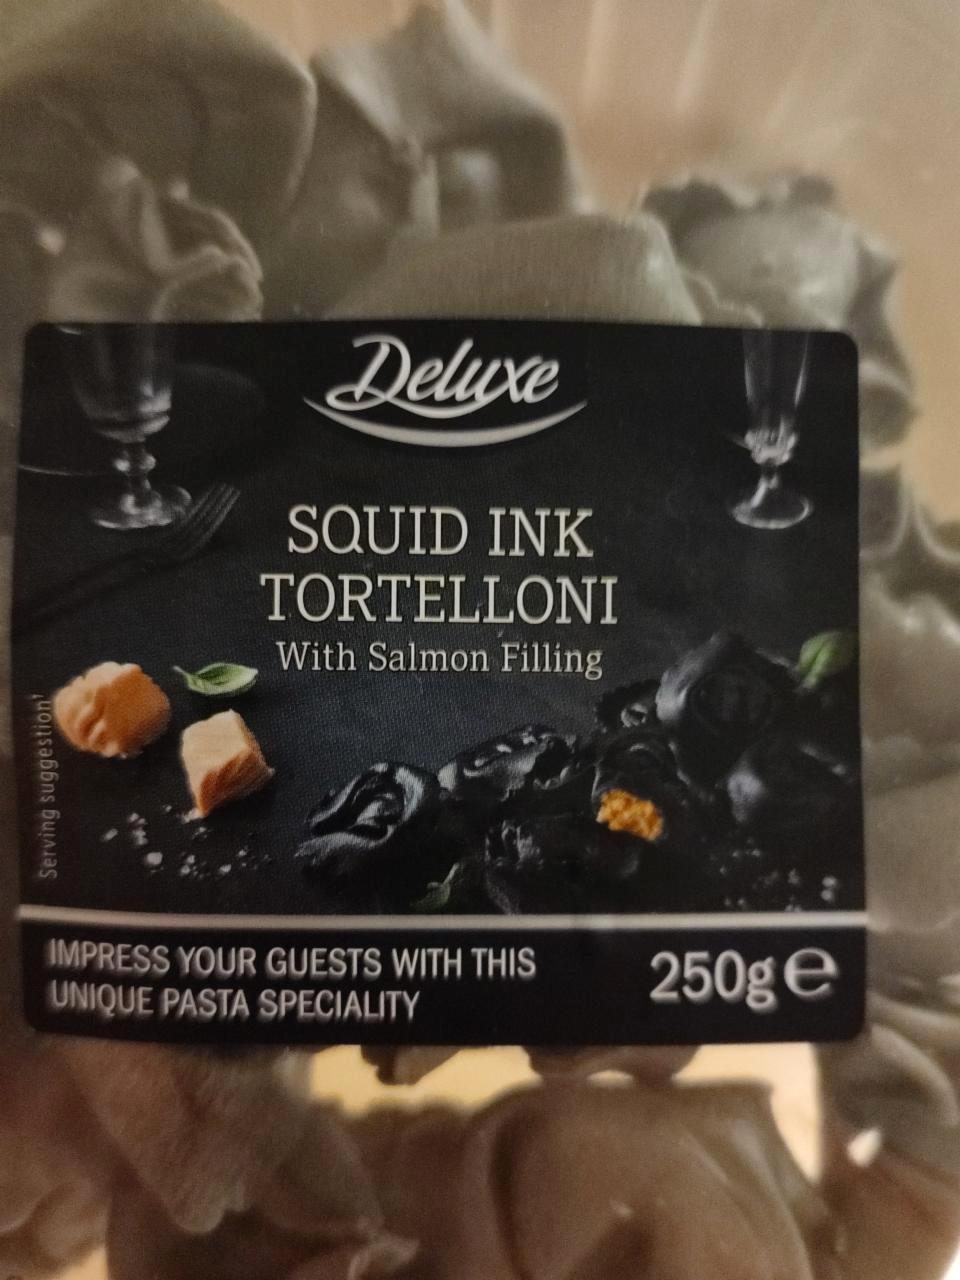 Képek - Squid ink tortelloni with salmon filling Lidl Deluxe